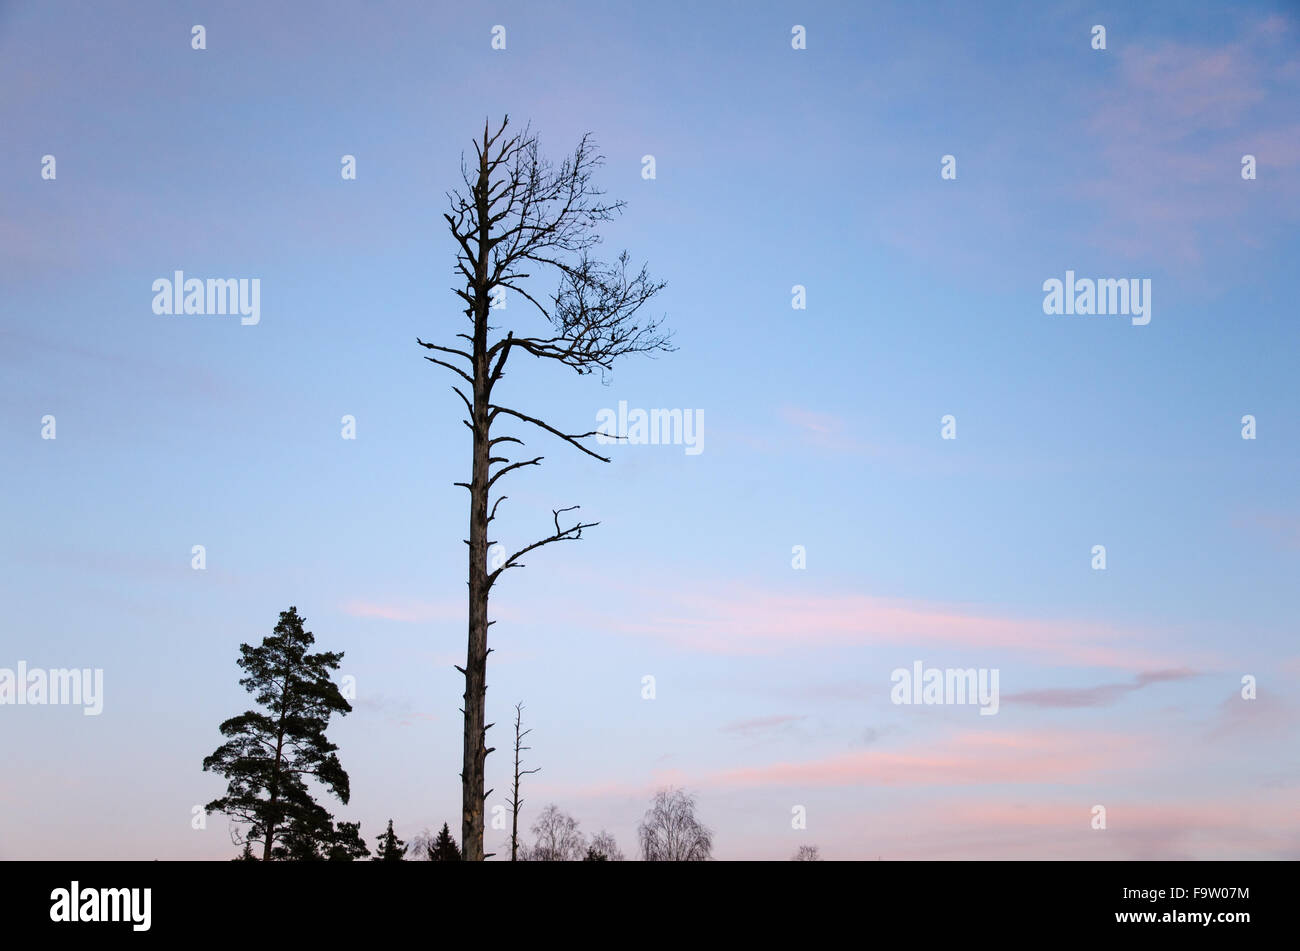 Single dead pine tree sihouette at a blue sky by dusk Stock Photo